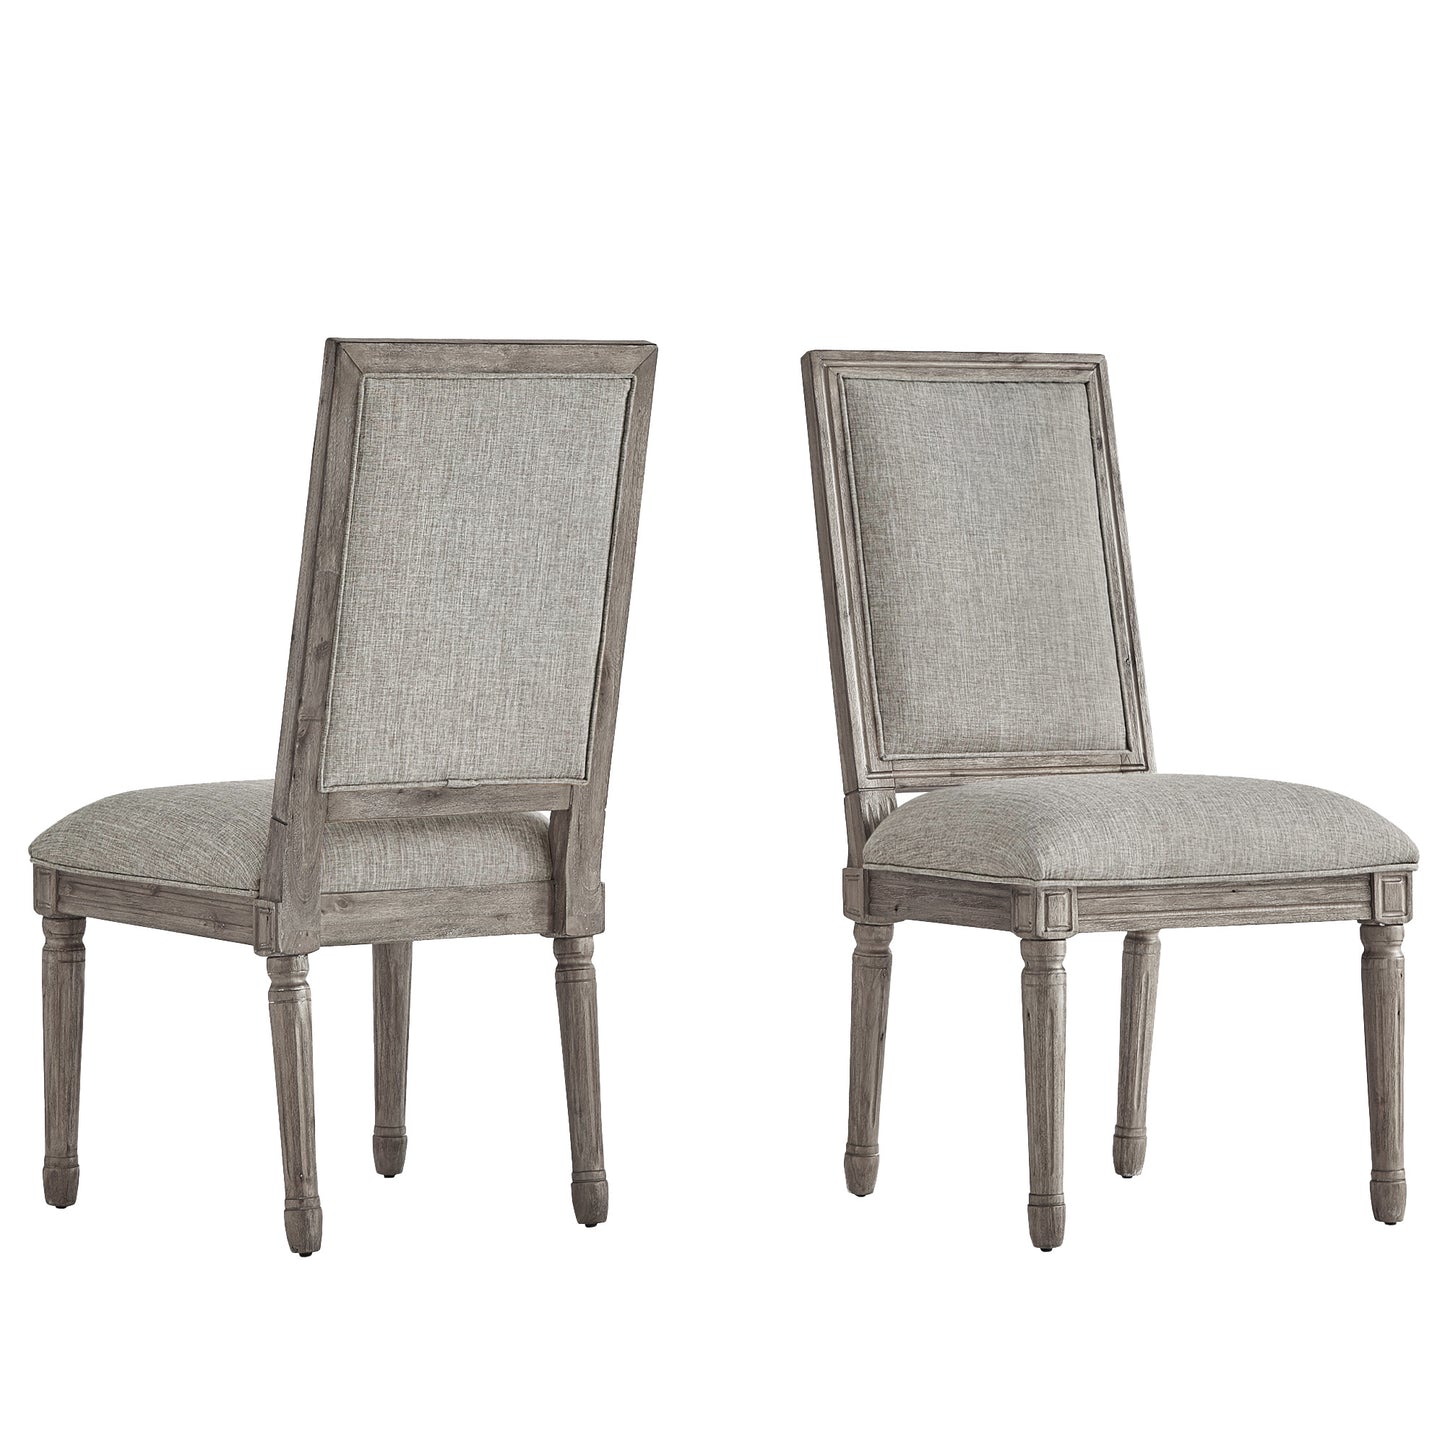 Rectangular Linen and Wood Dining Chairs (Set of 2) - Grey Linen, Antique Grey Oak Finish